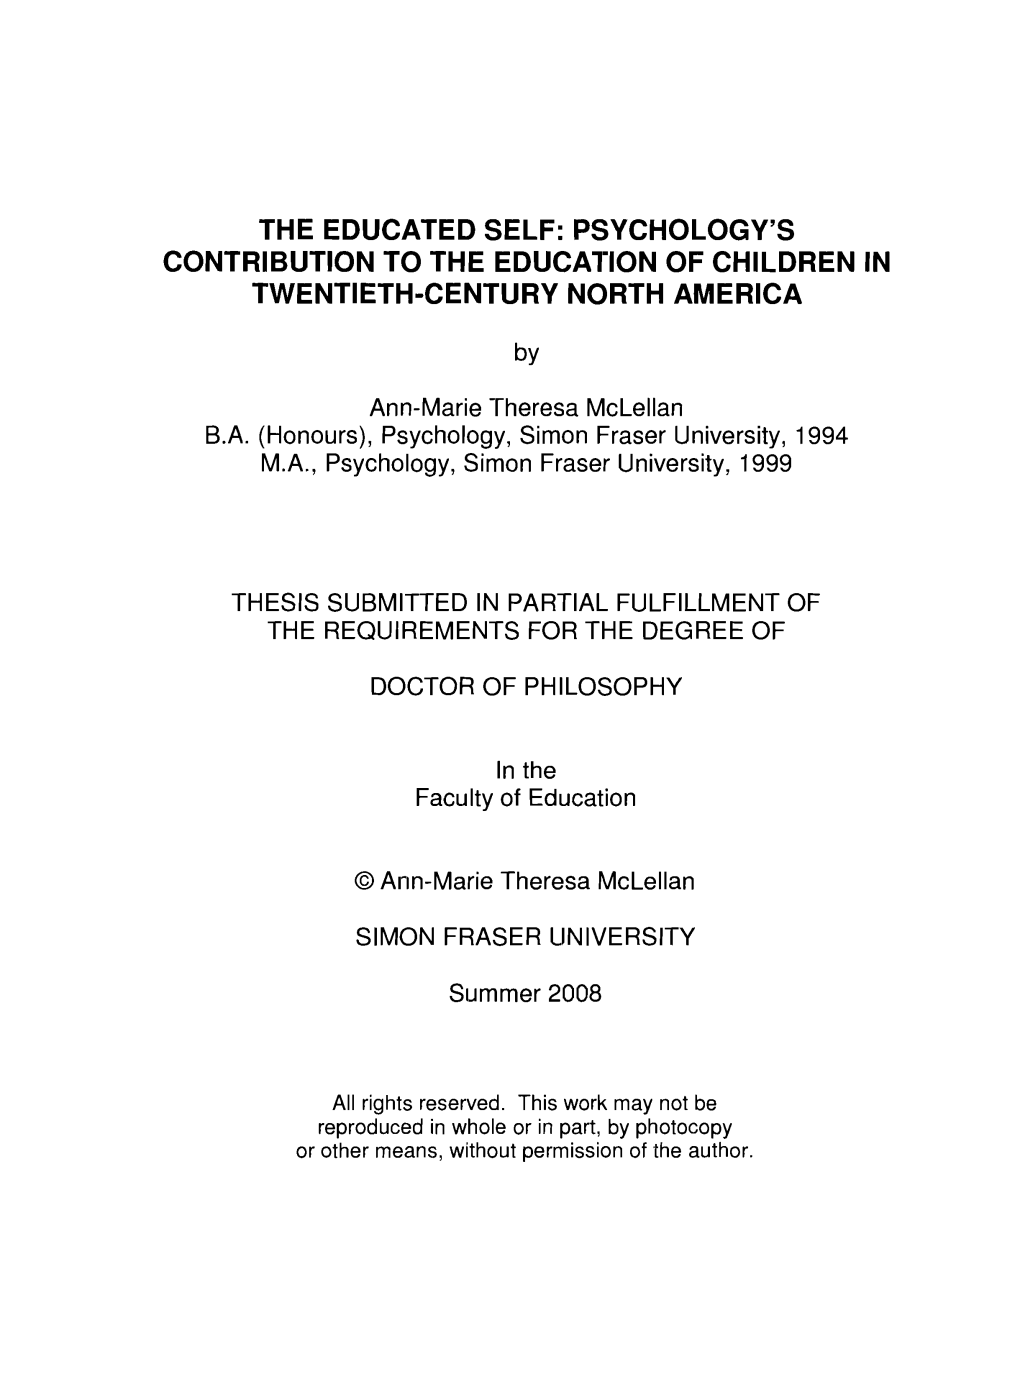 Psychology's Contribution to the Education of Children in Twentieth-Century North America